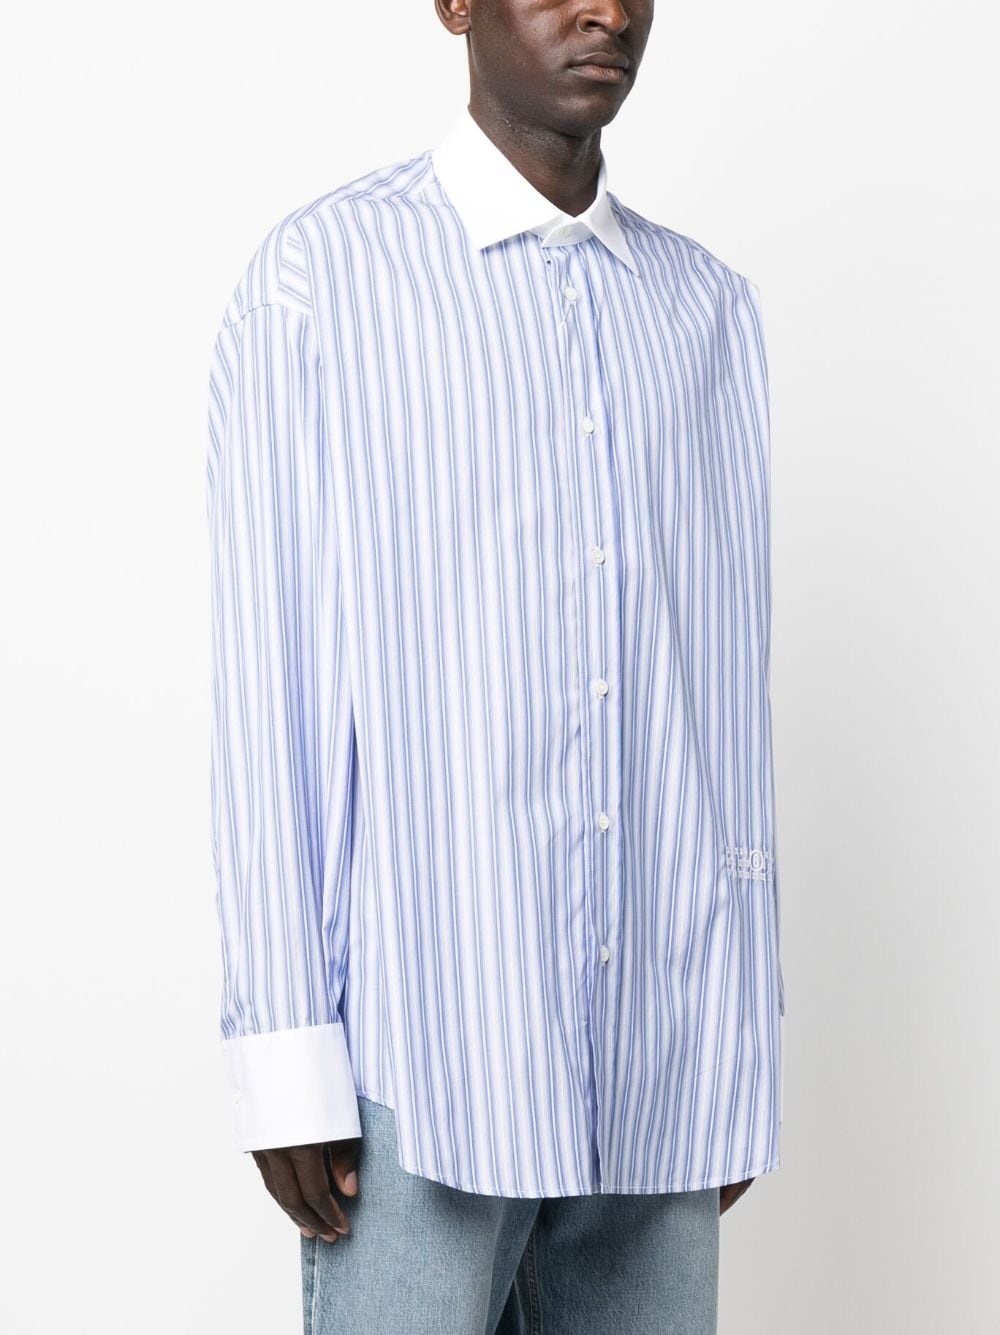 logo-embroidered striped cotton shirt - 3